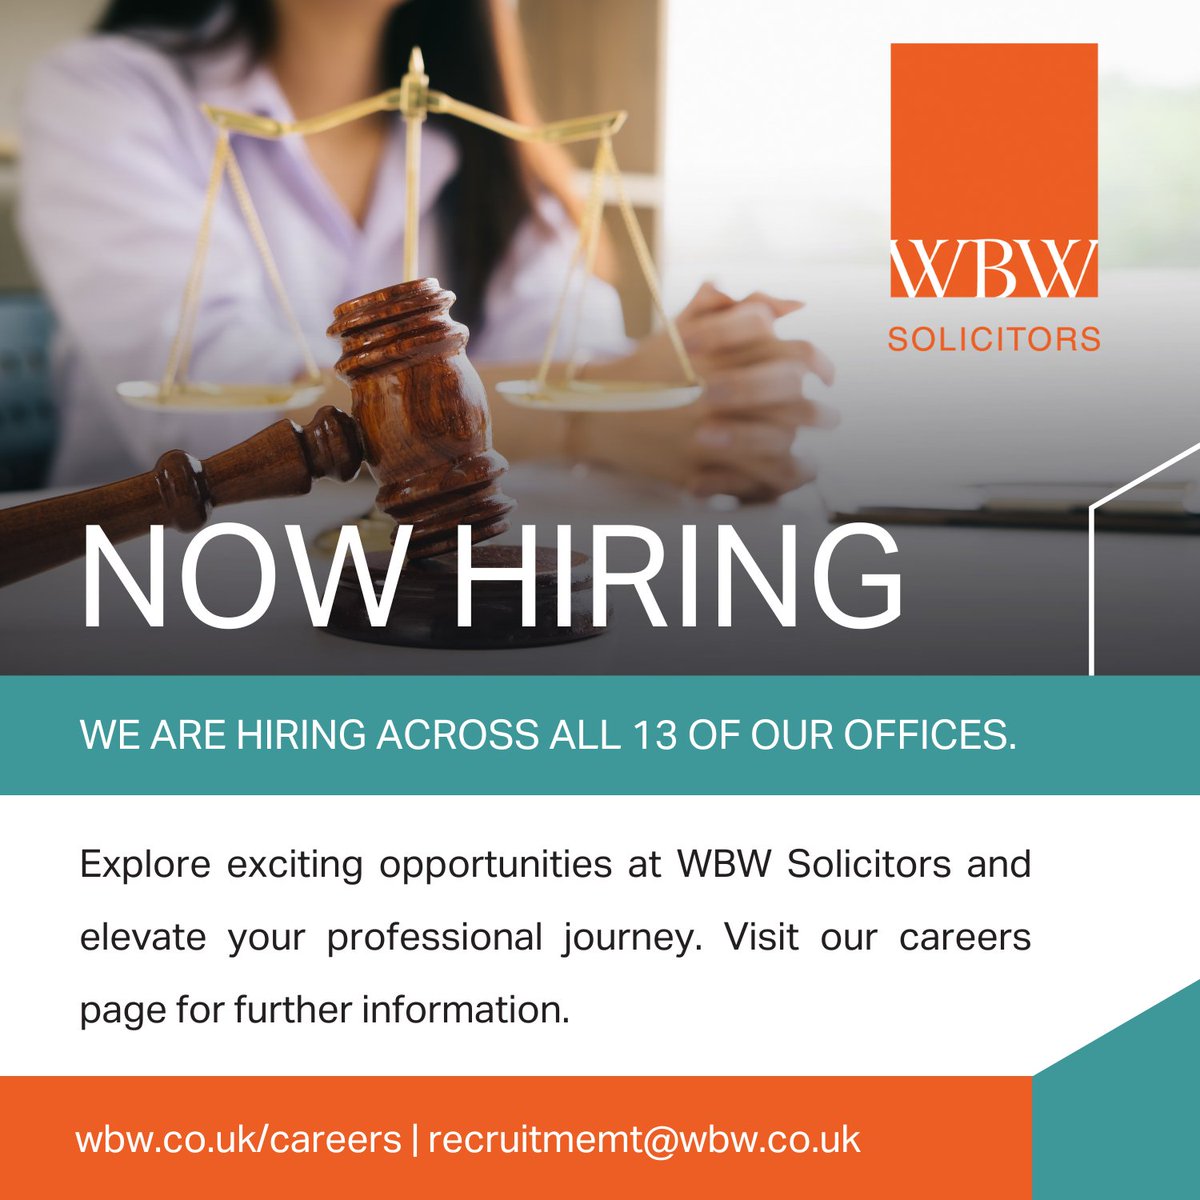 Ready for your next big move? 💼 WBW Solicitors is hiring!  If you're ready to embark on a new professional chapter, we'd love to hear from you. 📖✨

#JobOpportunity #LegalCareers #JoinOurTeam #LegalProfessionals